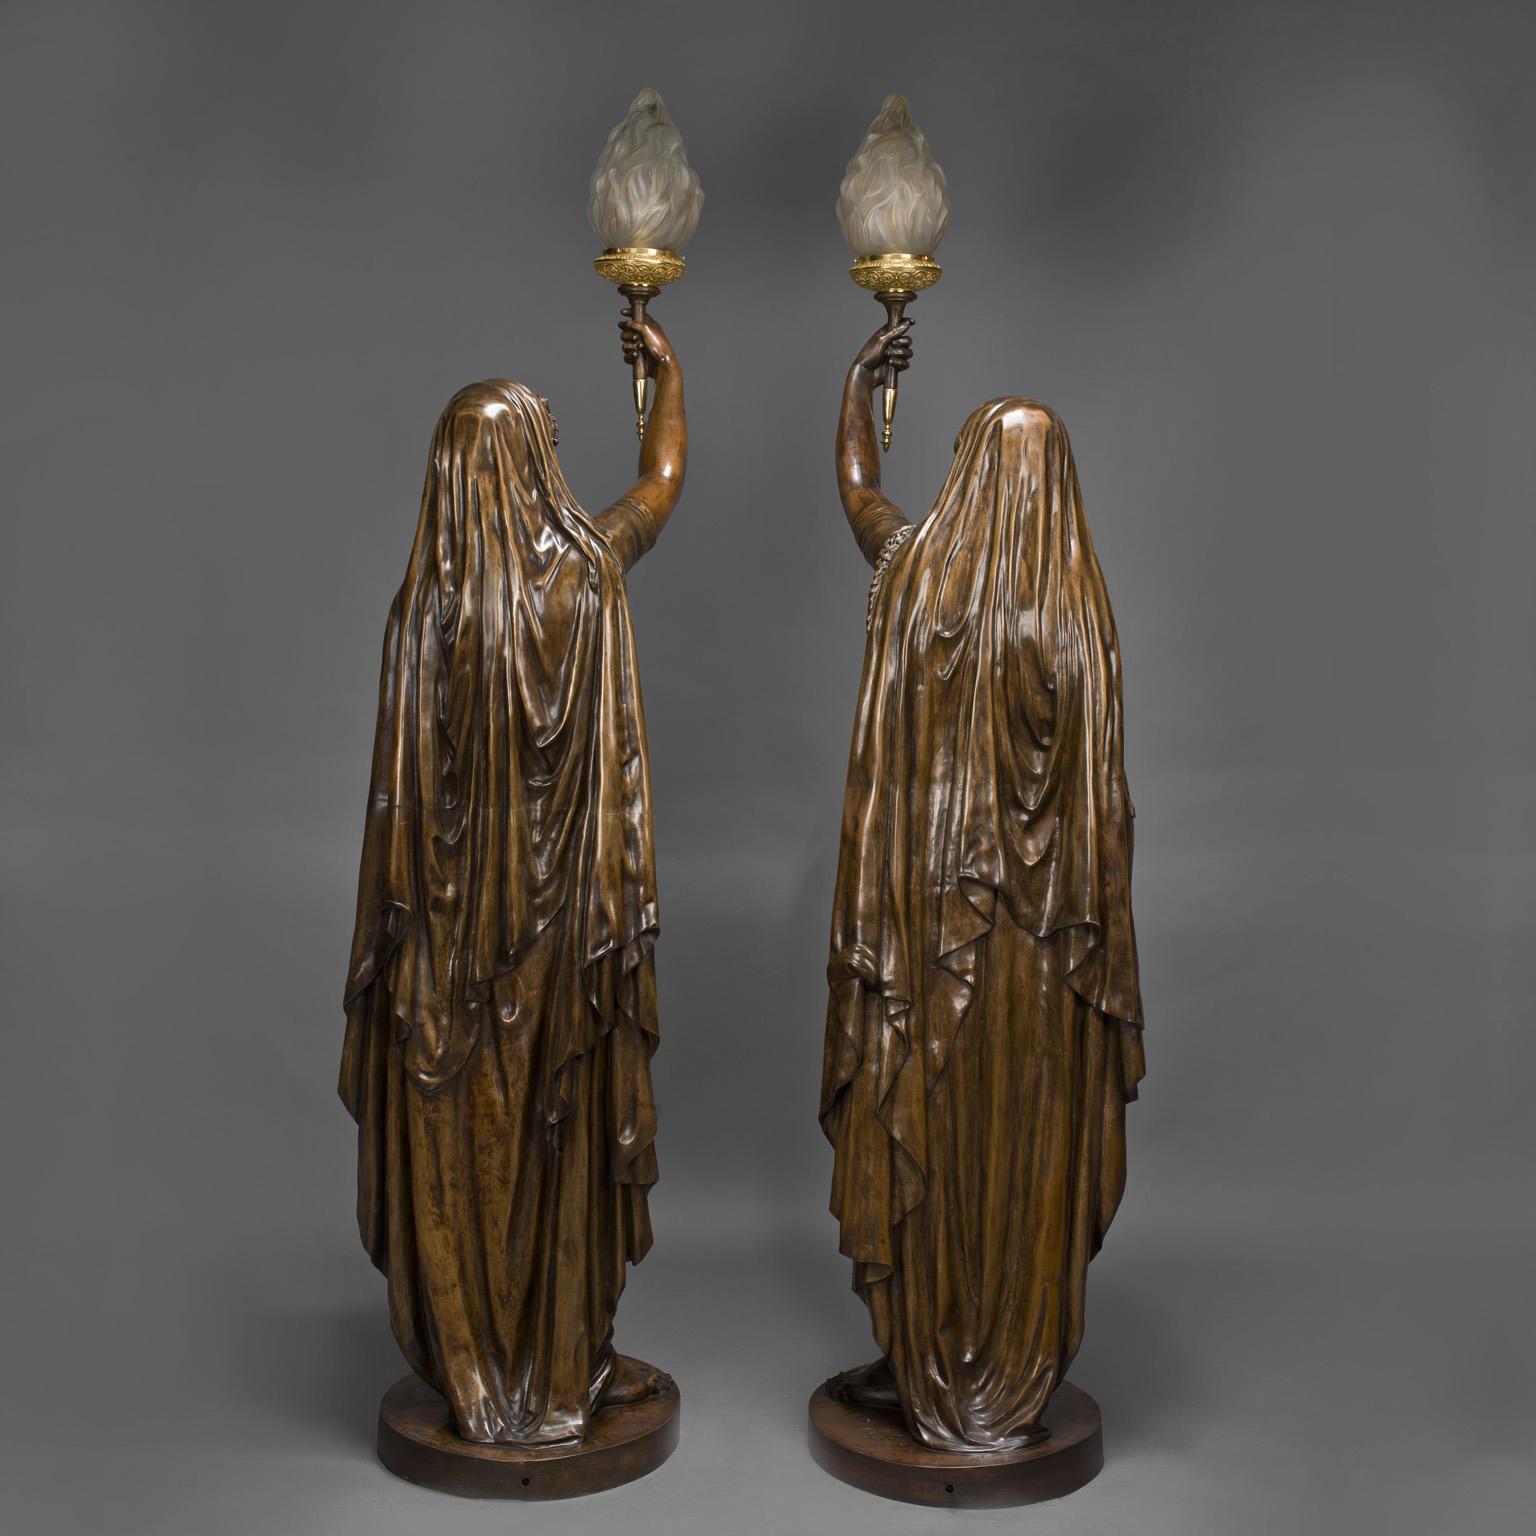 Pair of Large Patinated Bronze Figural Torcheres Cast by Barbedienne, Dated 1872 In Good Condition For Sale In Brighton, West Sussex